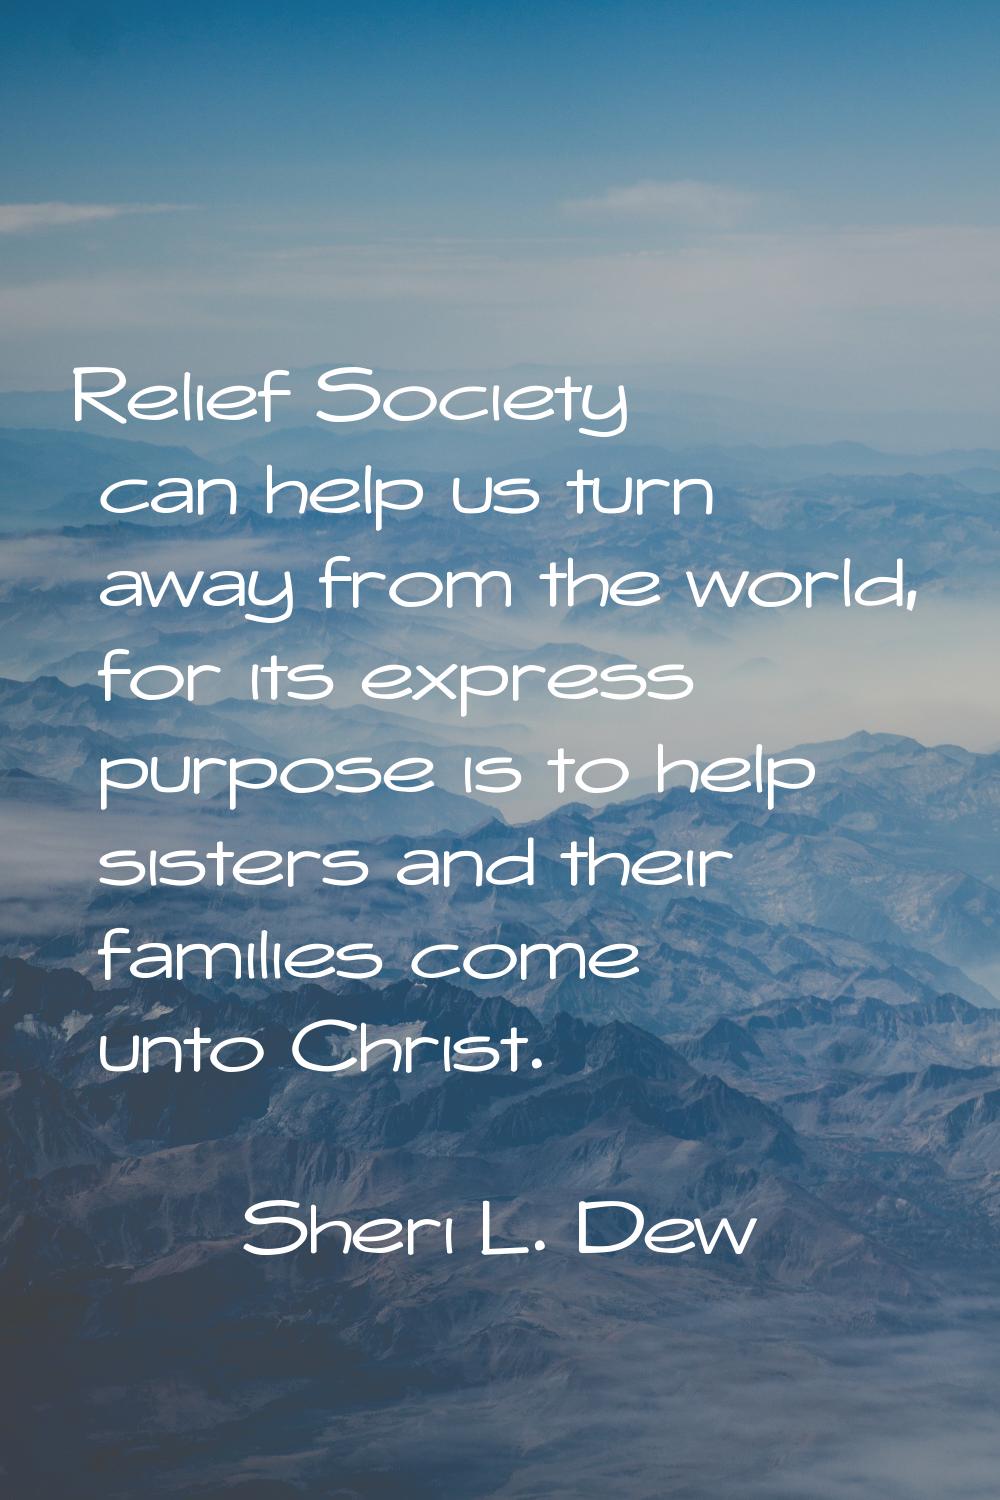 Relief Society can help us turn away from the world, for its express purpose is to help sisters and